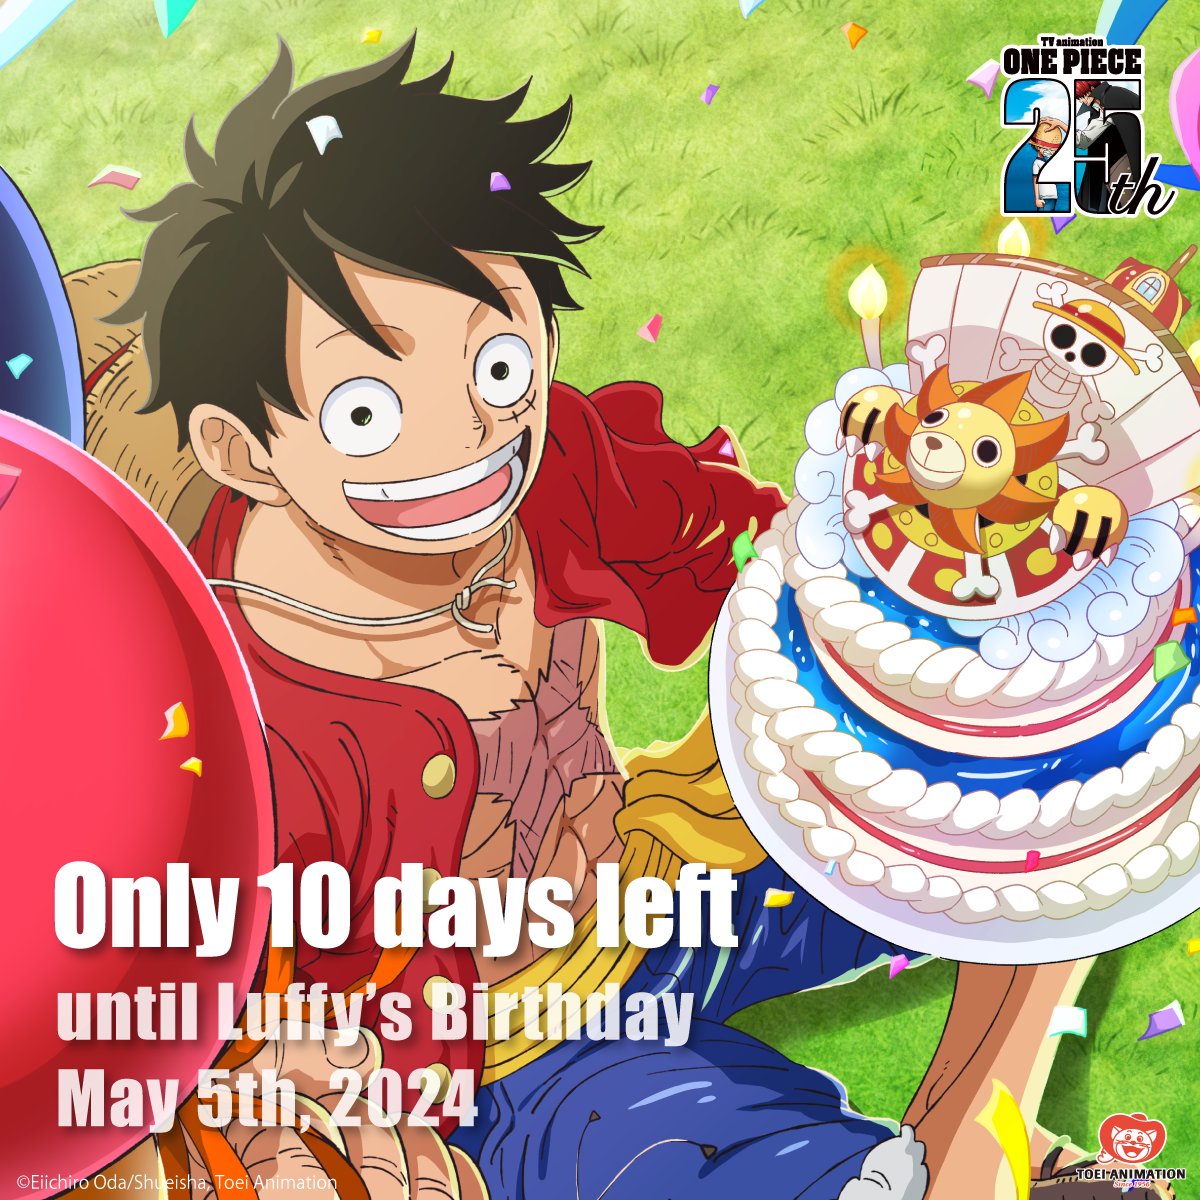 So now you know where to go for Luffy's birthday this year*😎  

Now let us give you more details!
In 5 countries you will find 5 gigantic inflatables of One Piece! 
These inflatables represent highlights of Luffy’s best moment to celebrate his birthday. 
Come and grab a little…